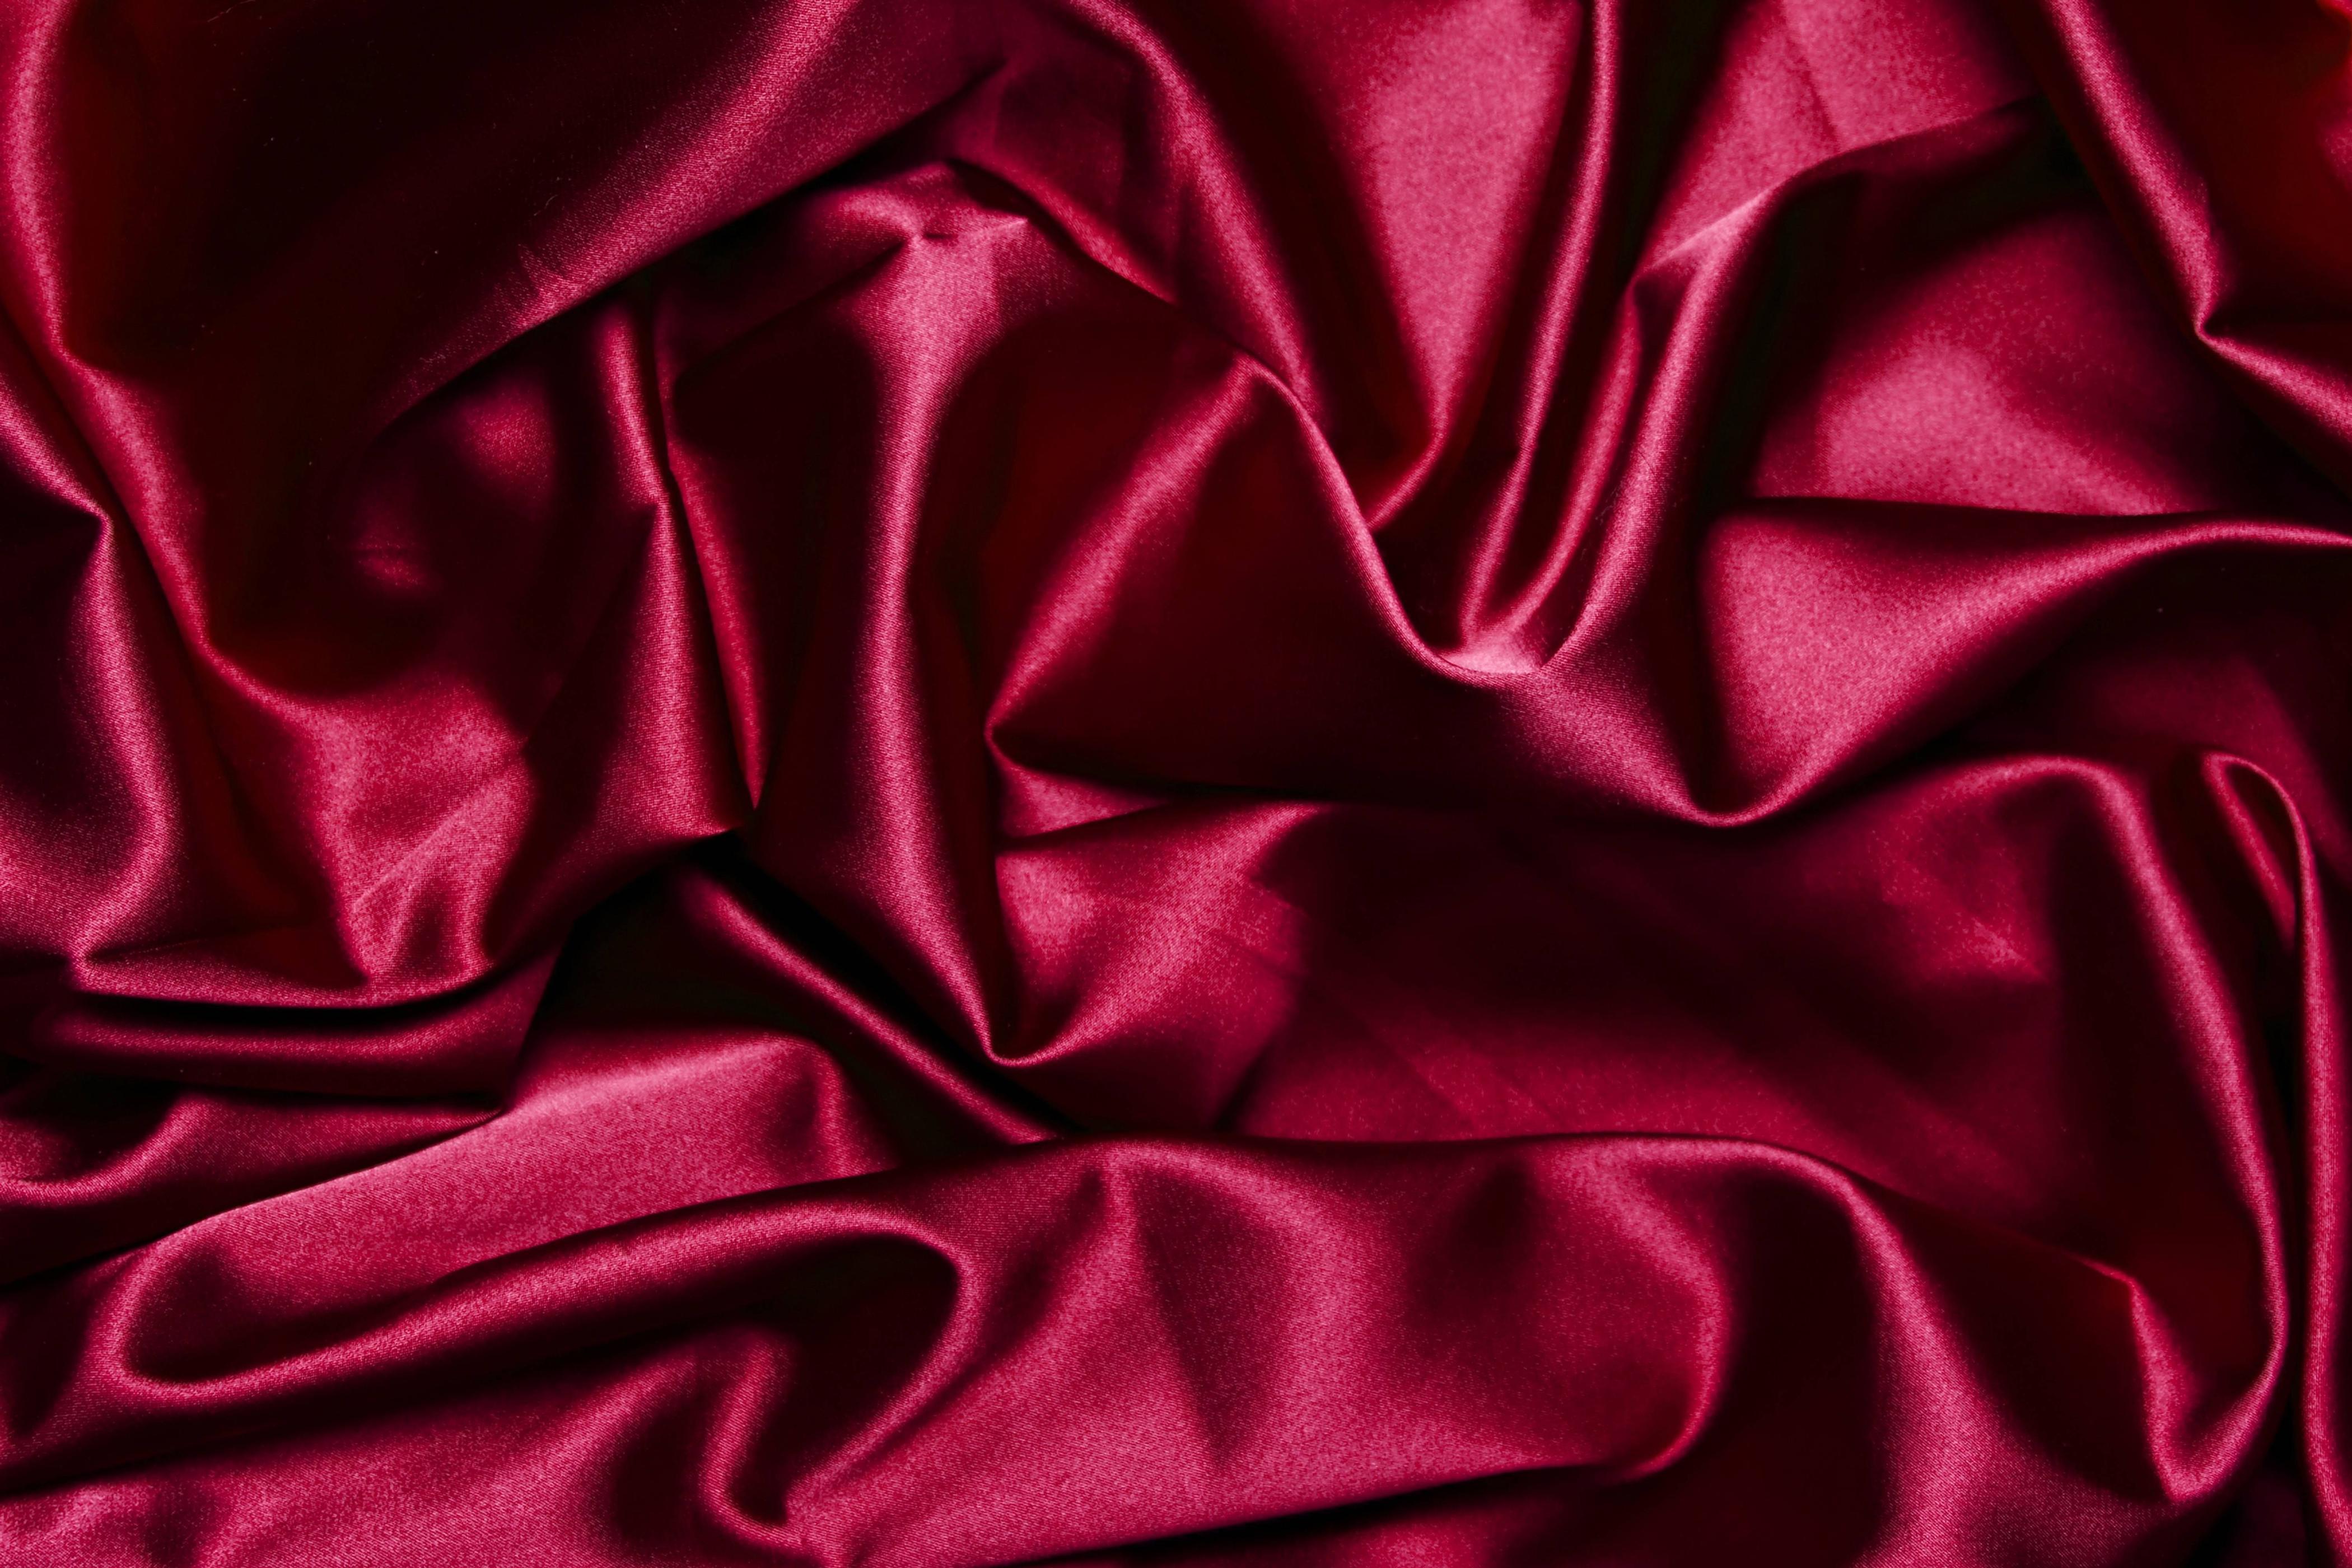 Dark Pink Silk Cloth with Pleat. Background and Texture